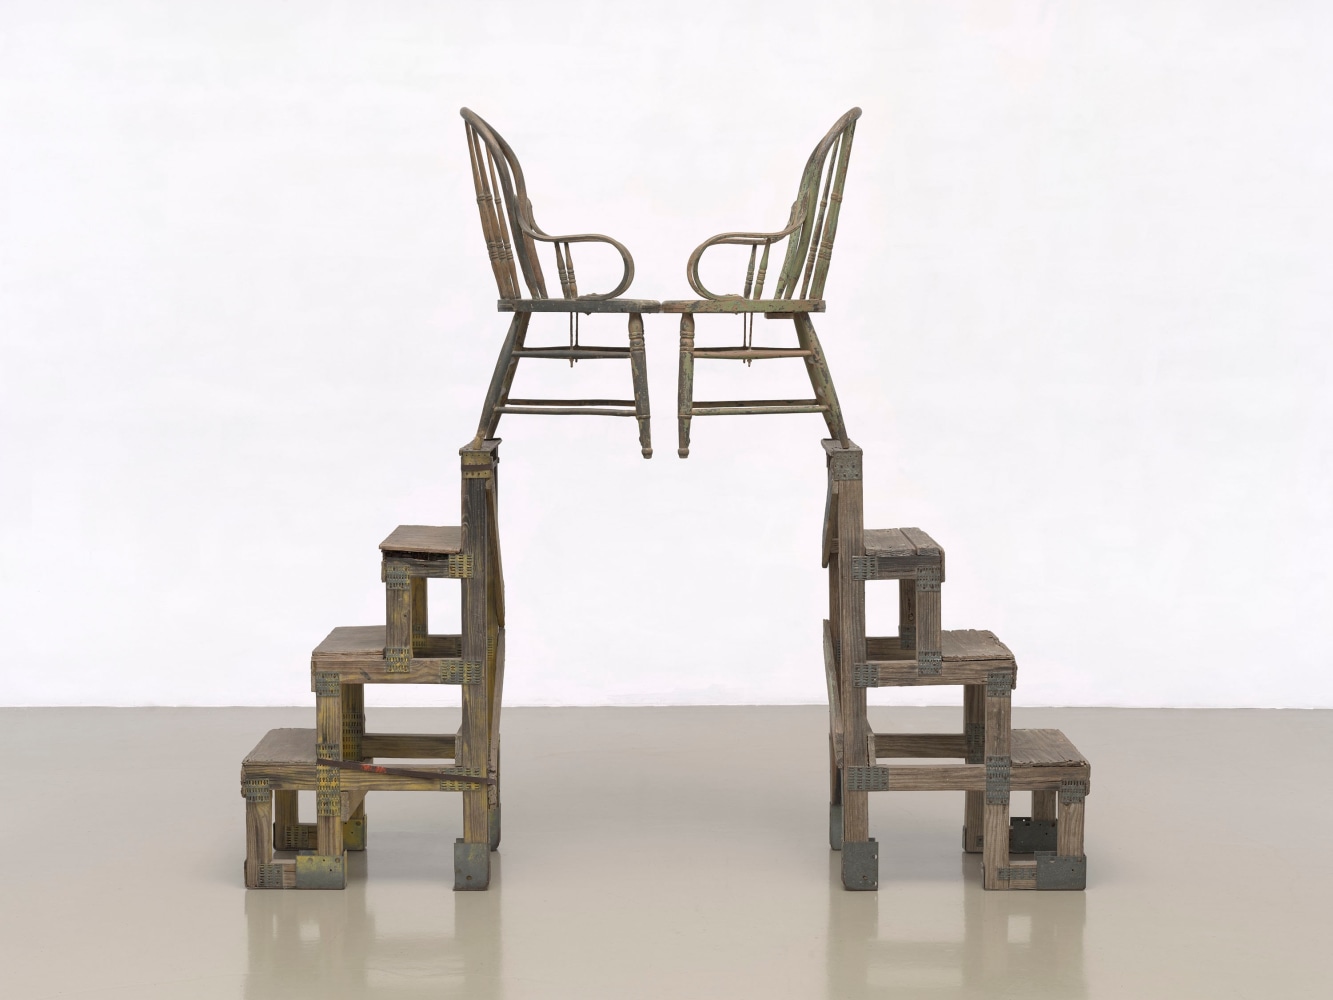 The Ancient Incident (Kabal American Zephyr)

1981

wood-and-metal stands with wood chairs

86&amp;nbsp;⅝ x 93&amp;nbsp;&amp;frac34; x 21&amp;nbsp;&amp;frac14; inches (220 x 238 x 54 cm)&amp;nbsp;

&amp;copy; 2022 The Robert Rauschenberg Foundation, Licensed by VAGA at Artists Rights Society (ARS), New York. Photo: Ron Amstutz, courtesy of The Robert Rauschenberg Foundation and Mnuchin Gallery, New York.